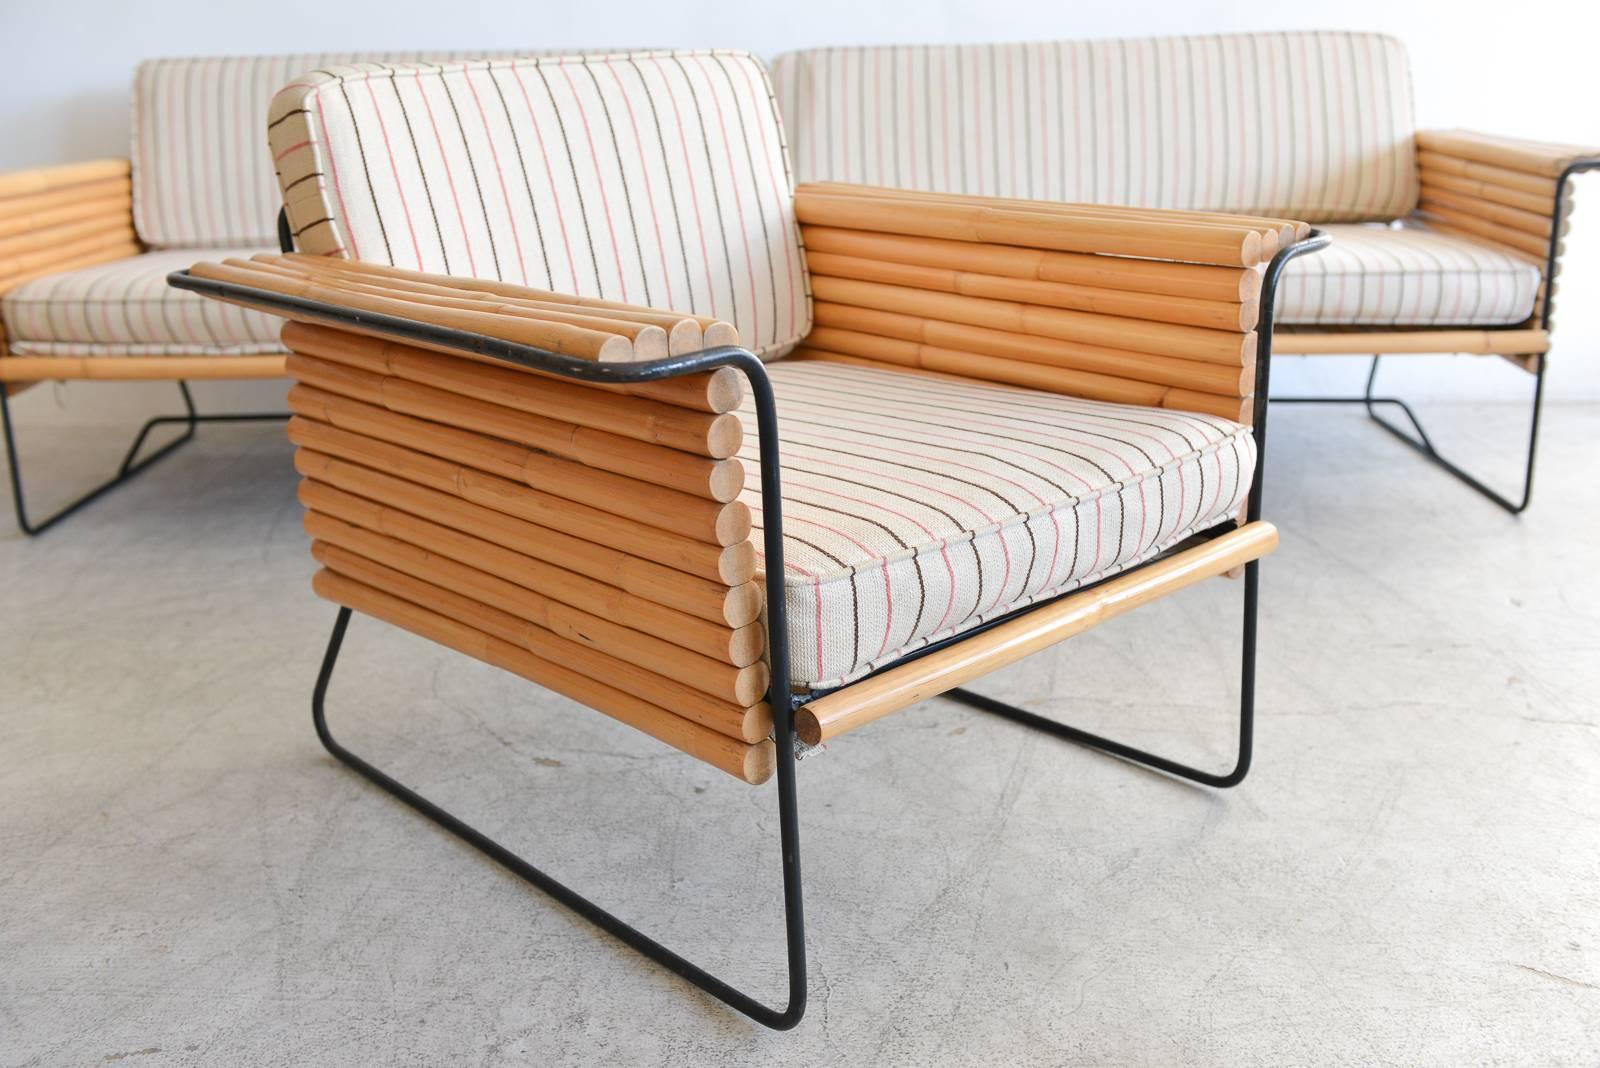 American Rattan and Wrought Iron Seating Ensemble by Ritts Co., Los Angeles, circa 1955